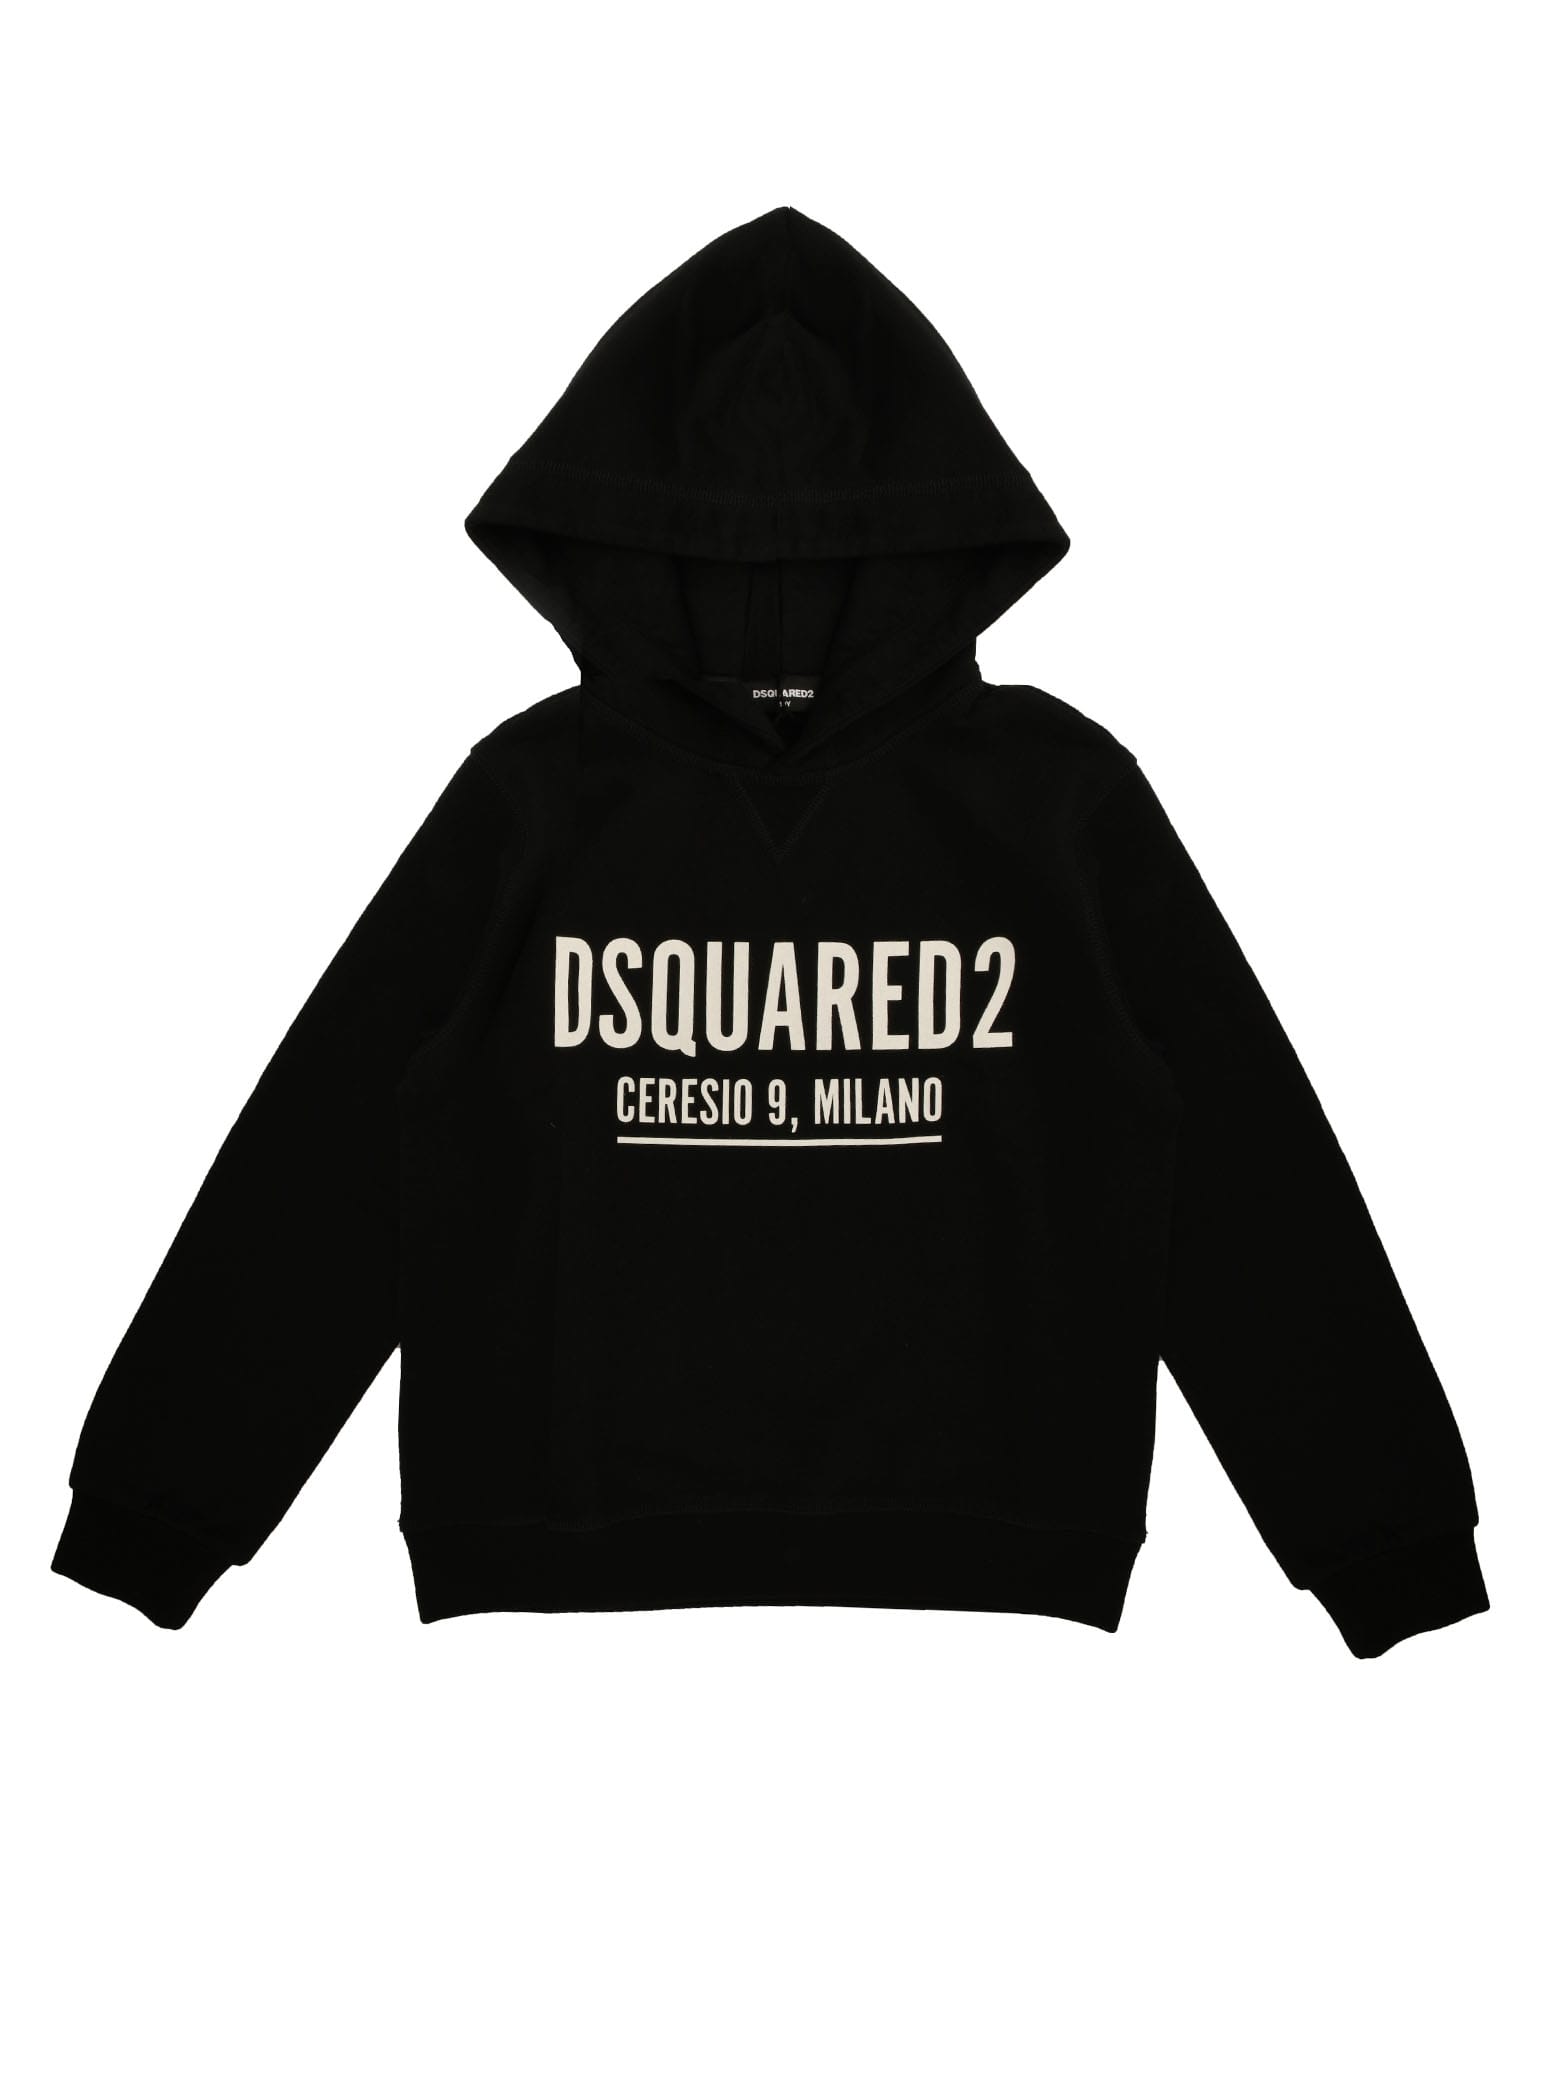 Dsquared2 Black Sweatshirt With Hood And White Logo